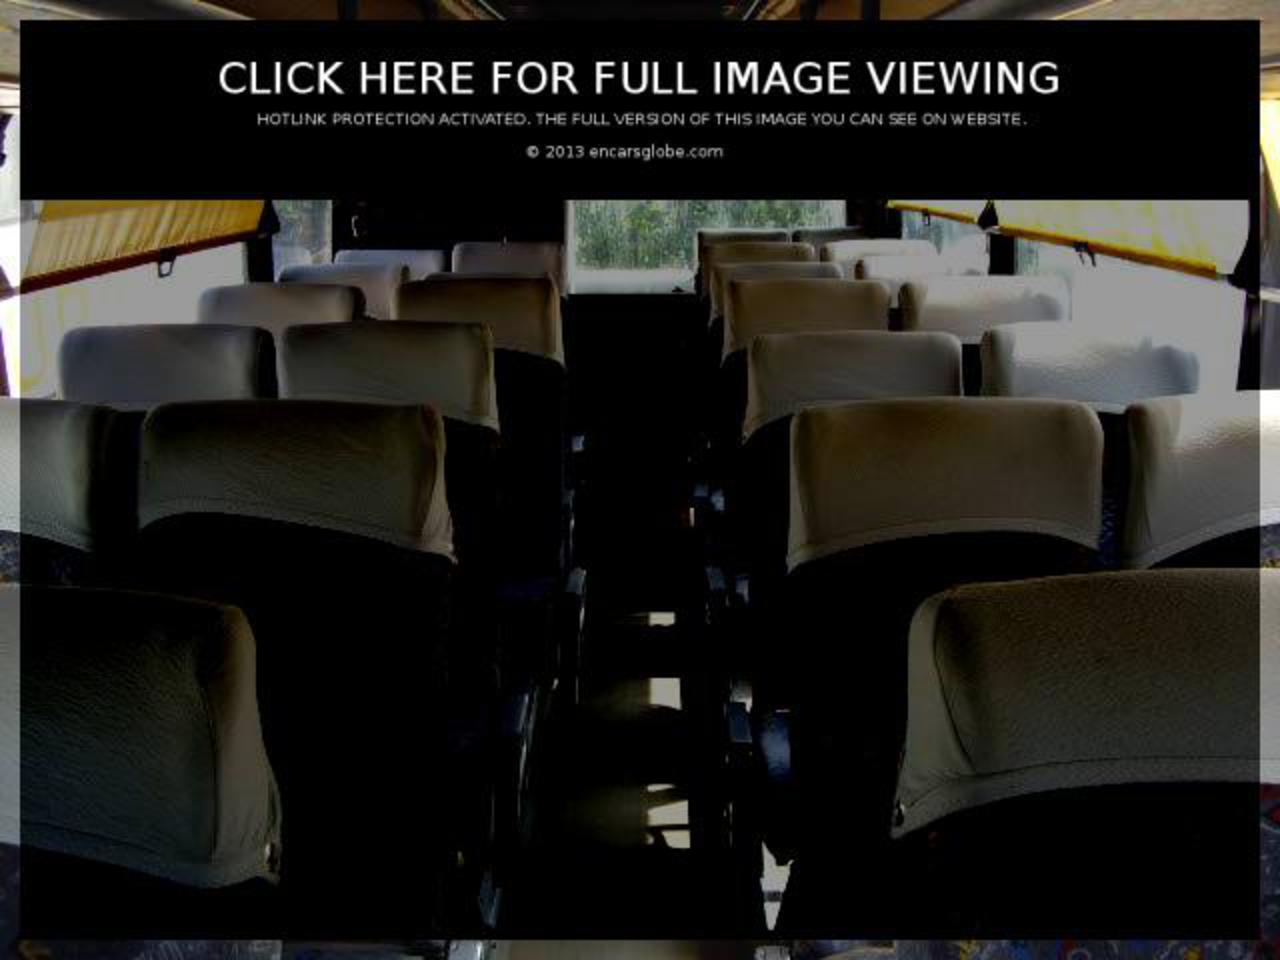 Neoplan N 208 H: Photo gallery, complete information about model ...